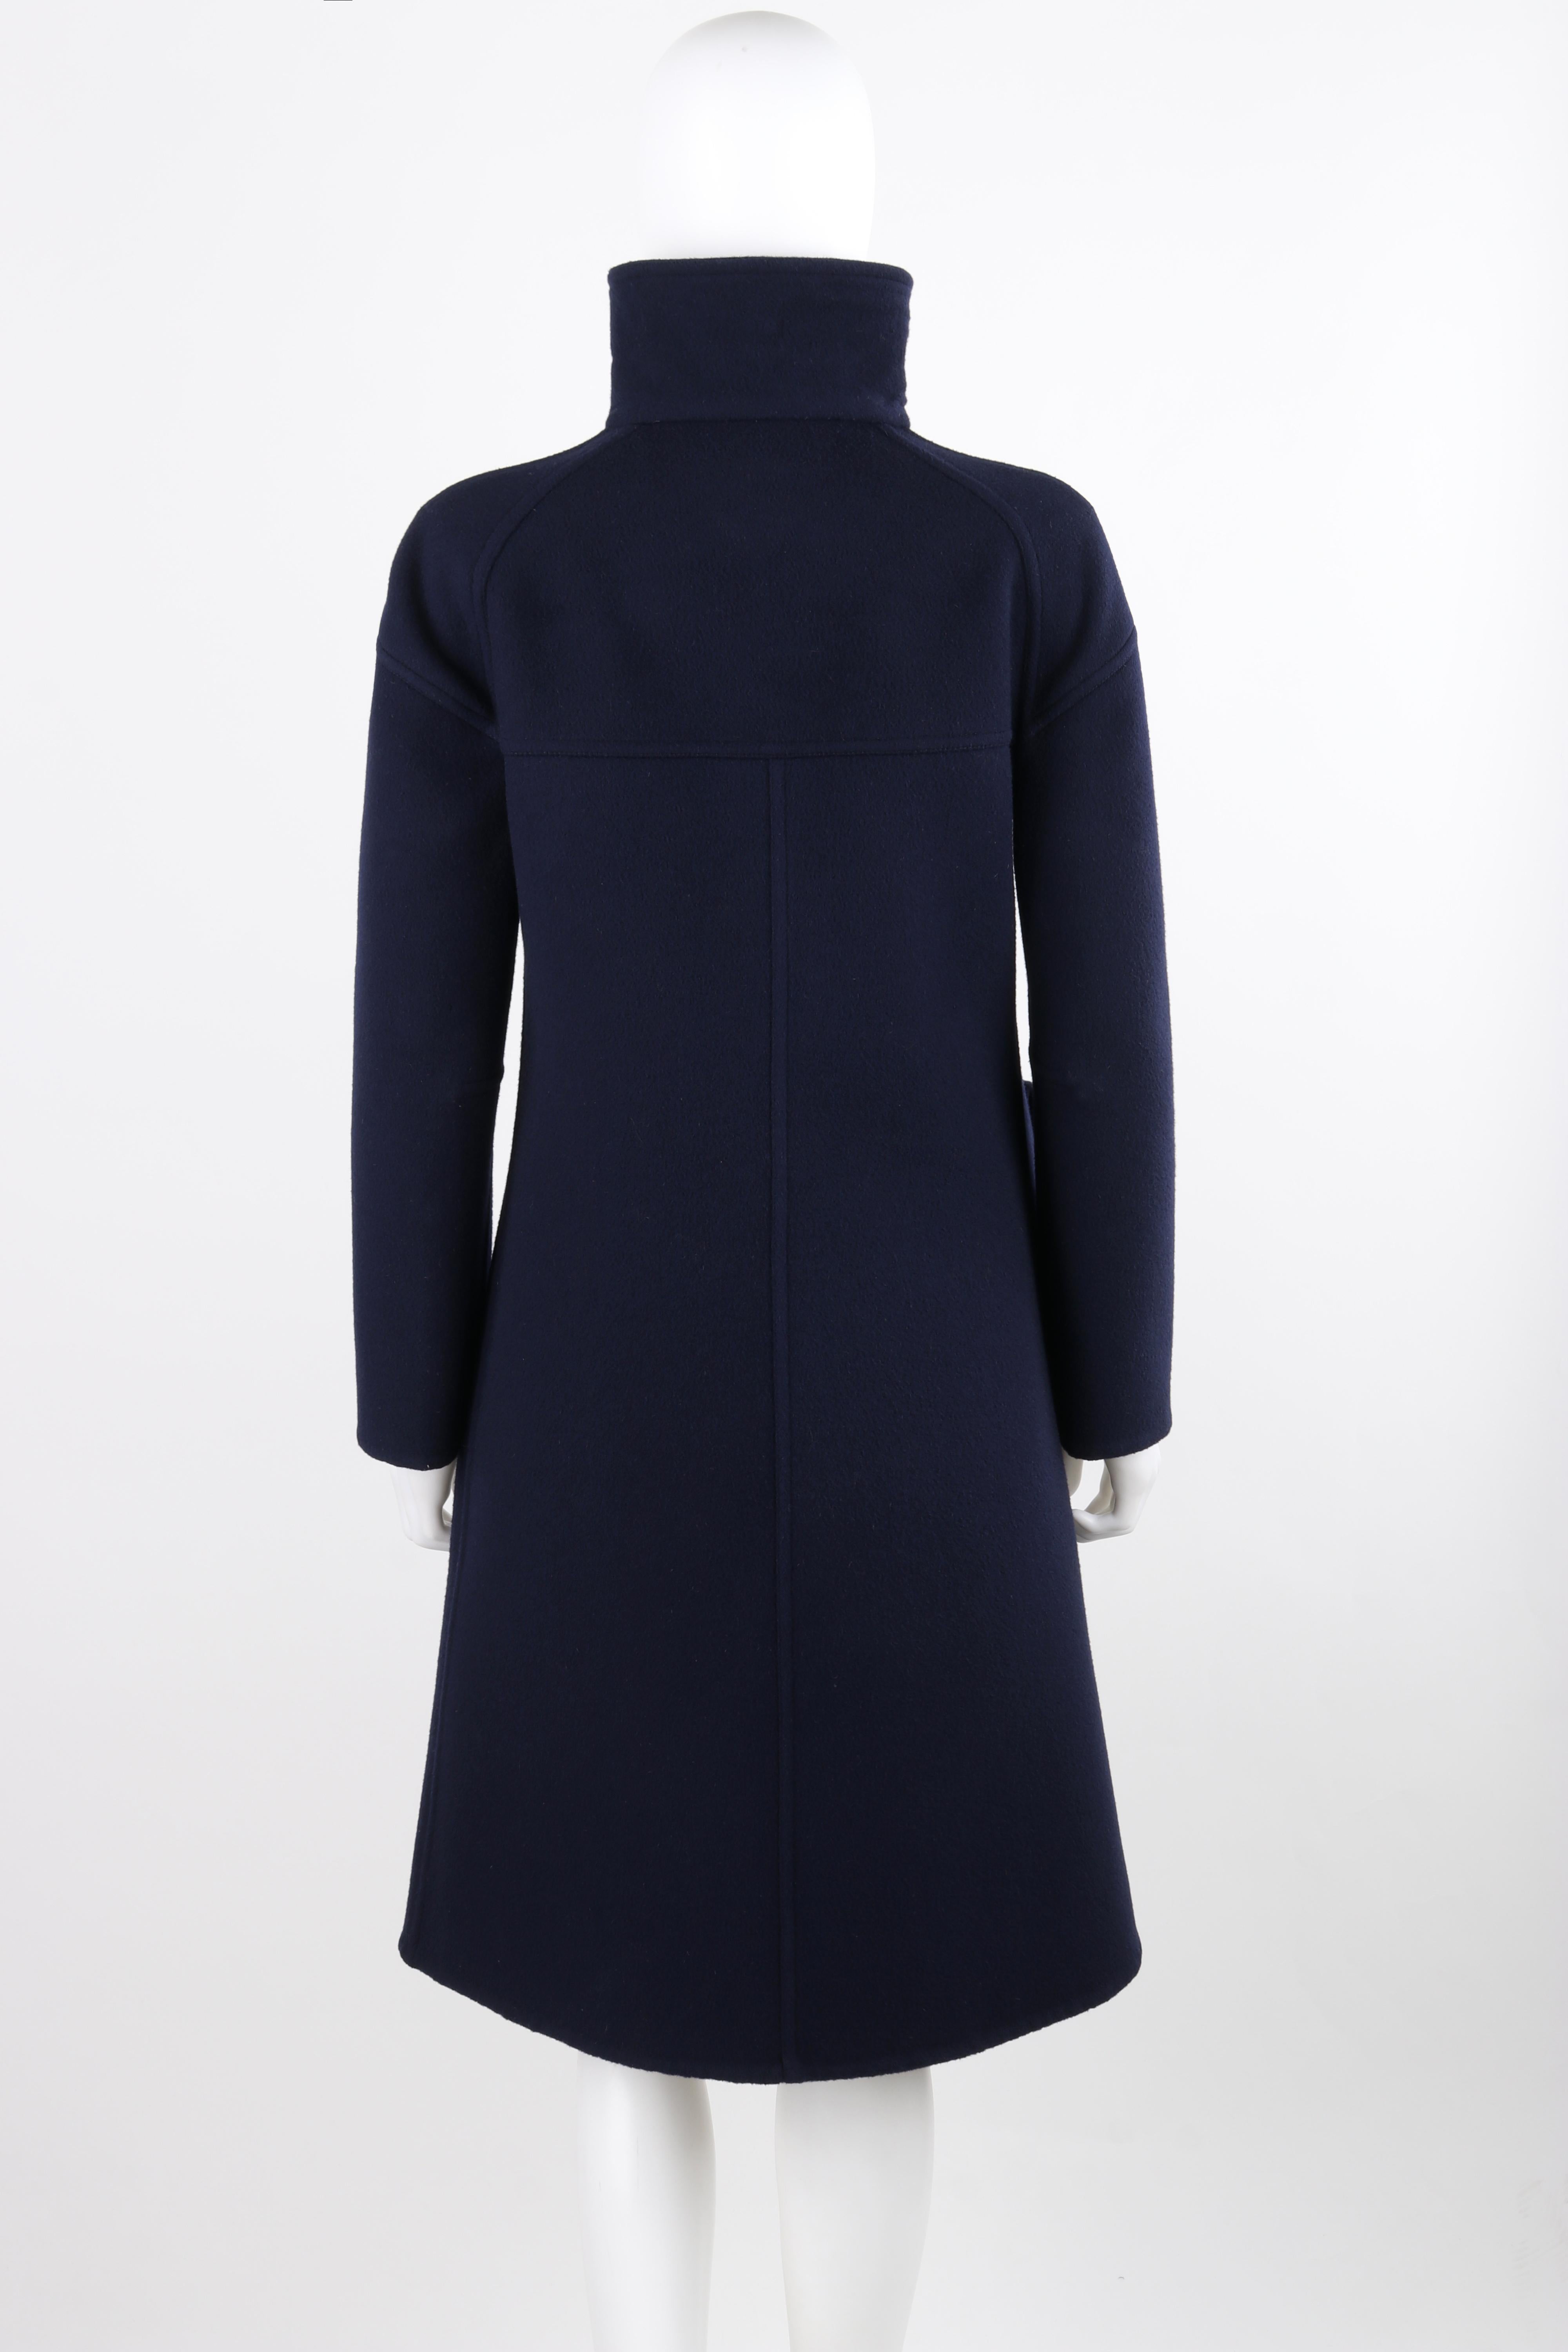 COURREGES c.1970's Couture Future Marine Navy Asymmetrical Button Front Overcoat For Sale 2